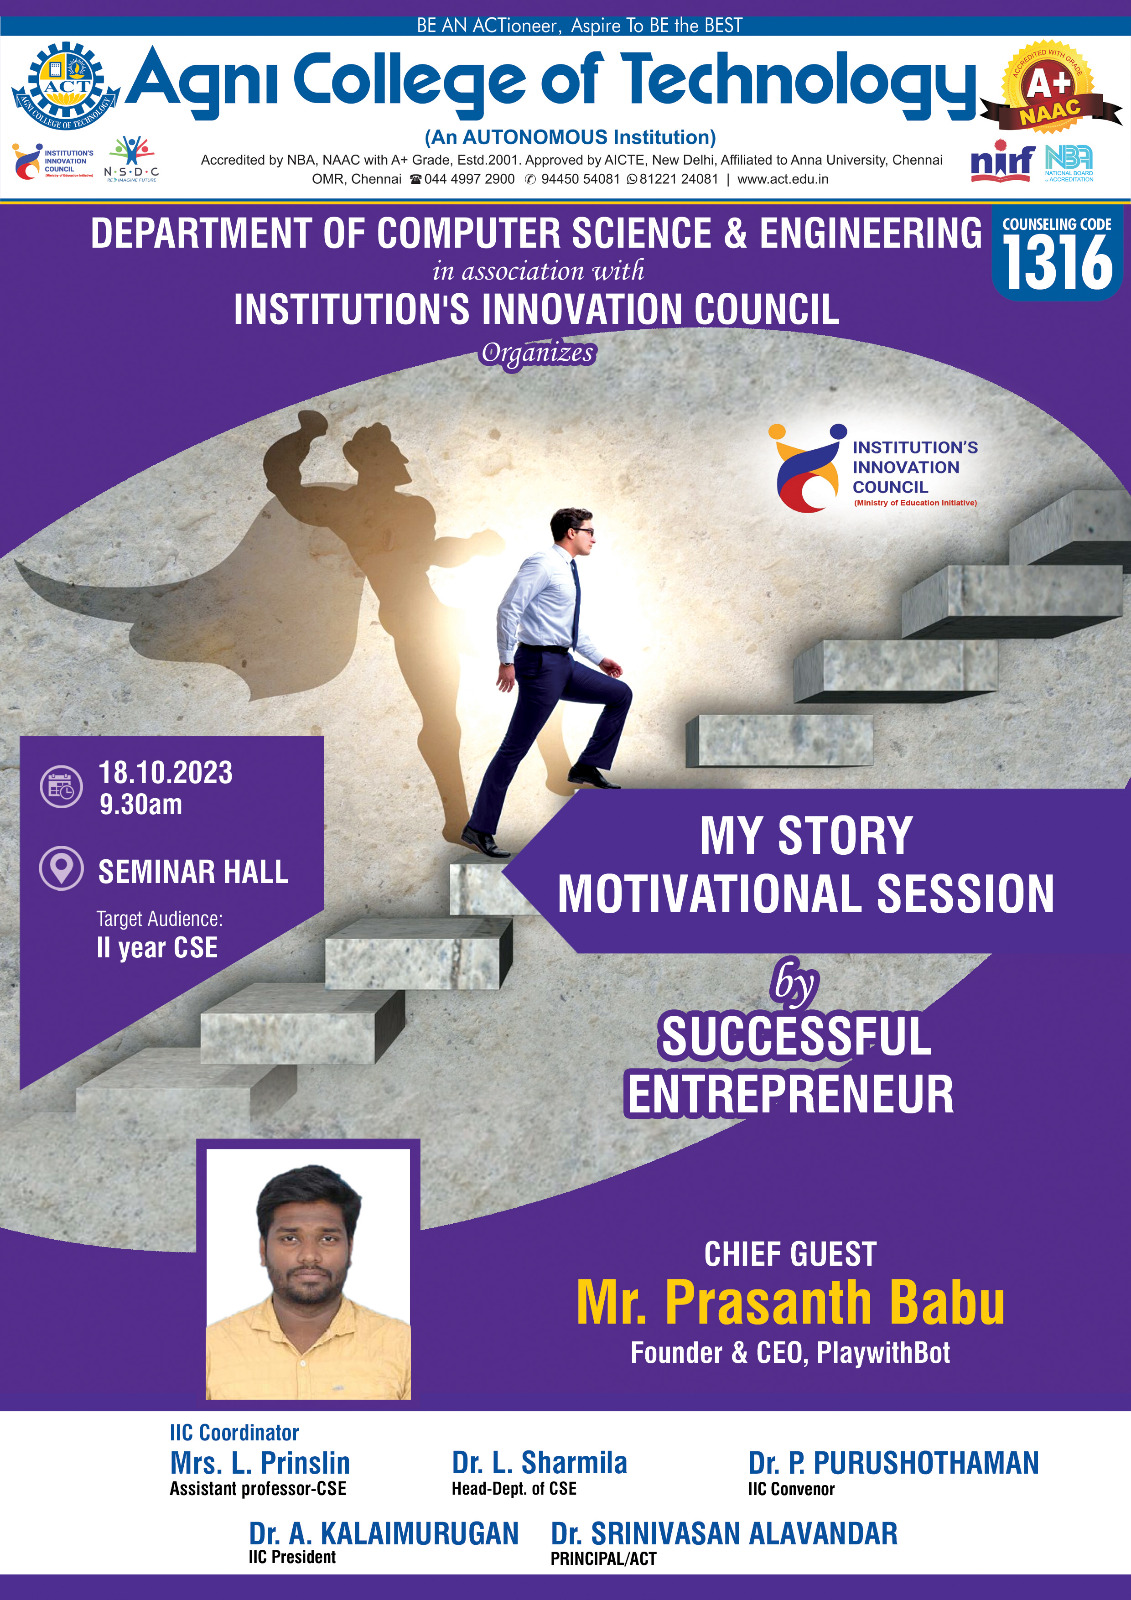 My Story Motivational Session by Successful Entrepreneur